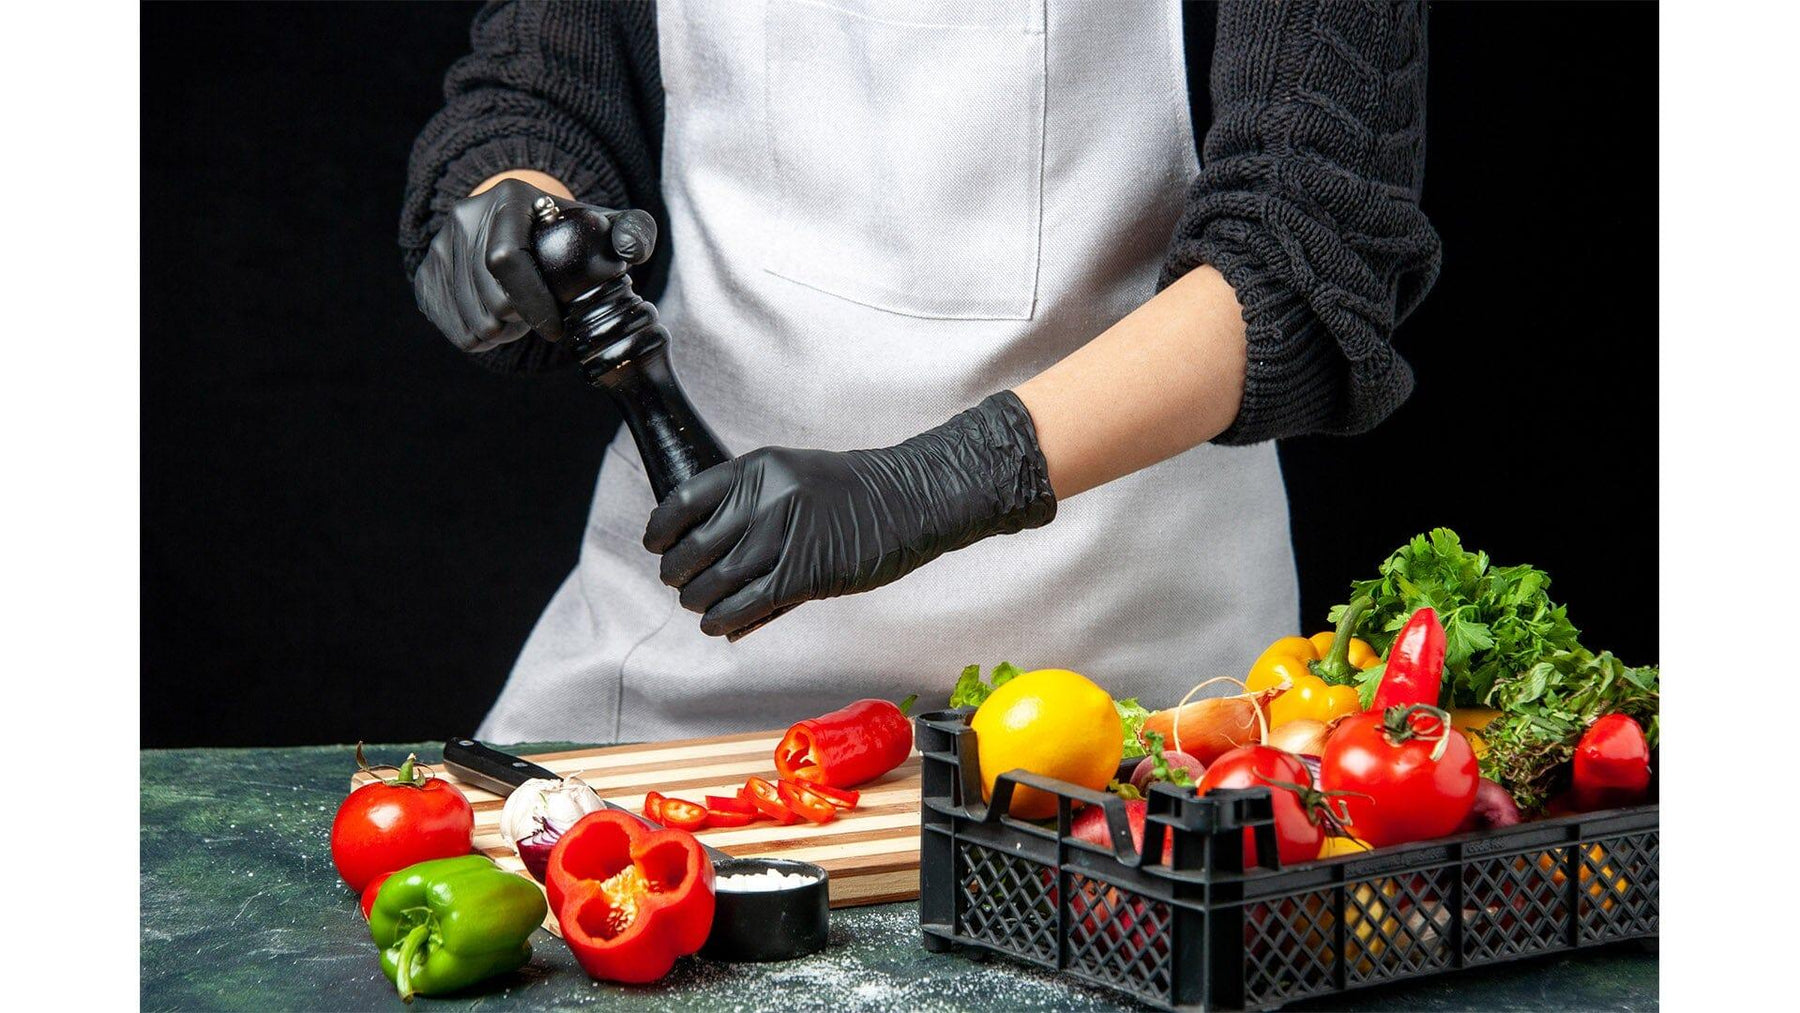 Food Service Gloves - Balancing Safety and Sustainability